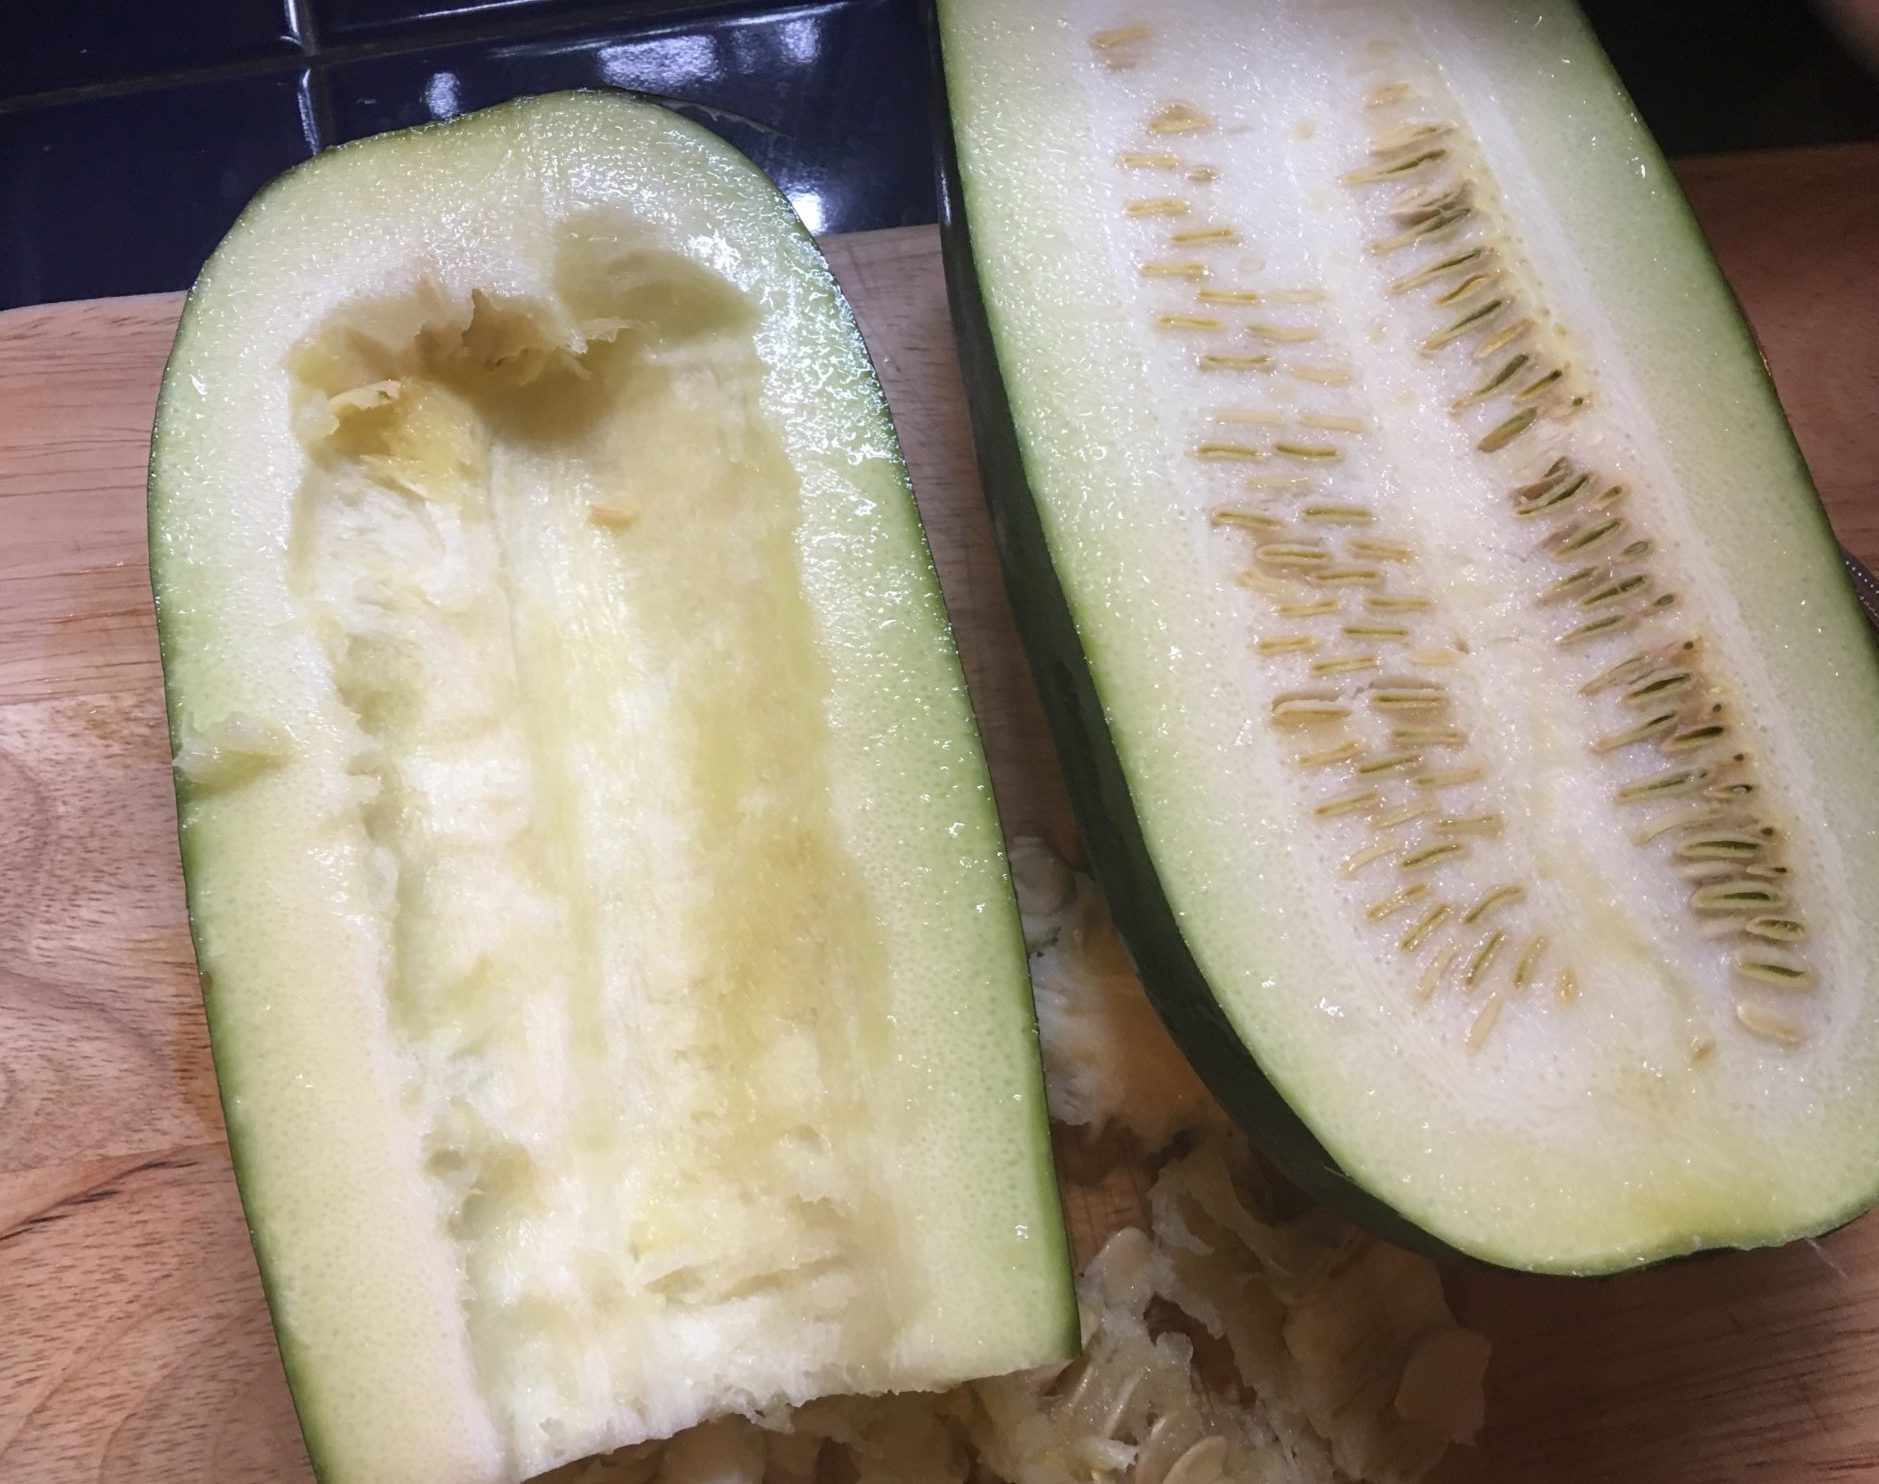 Seeds scooped out of large zucchini